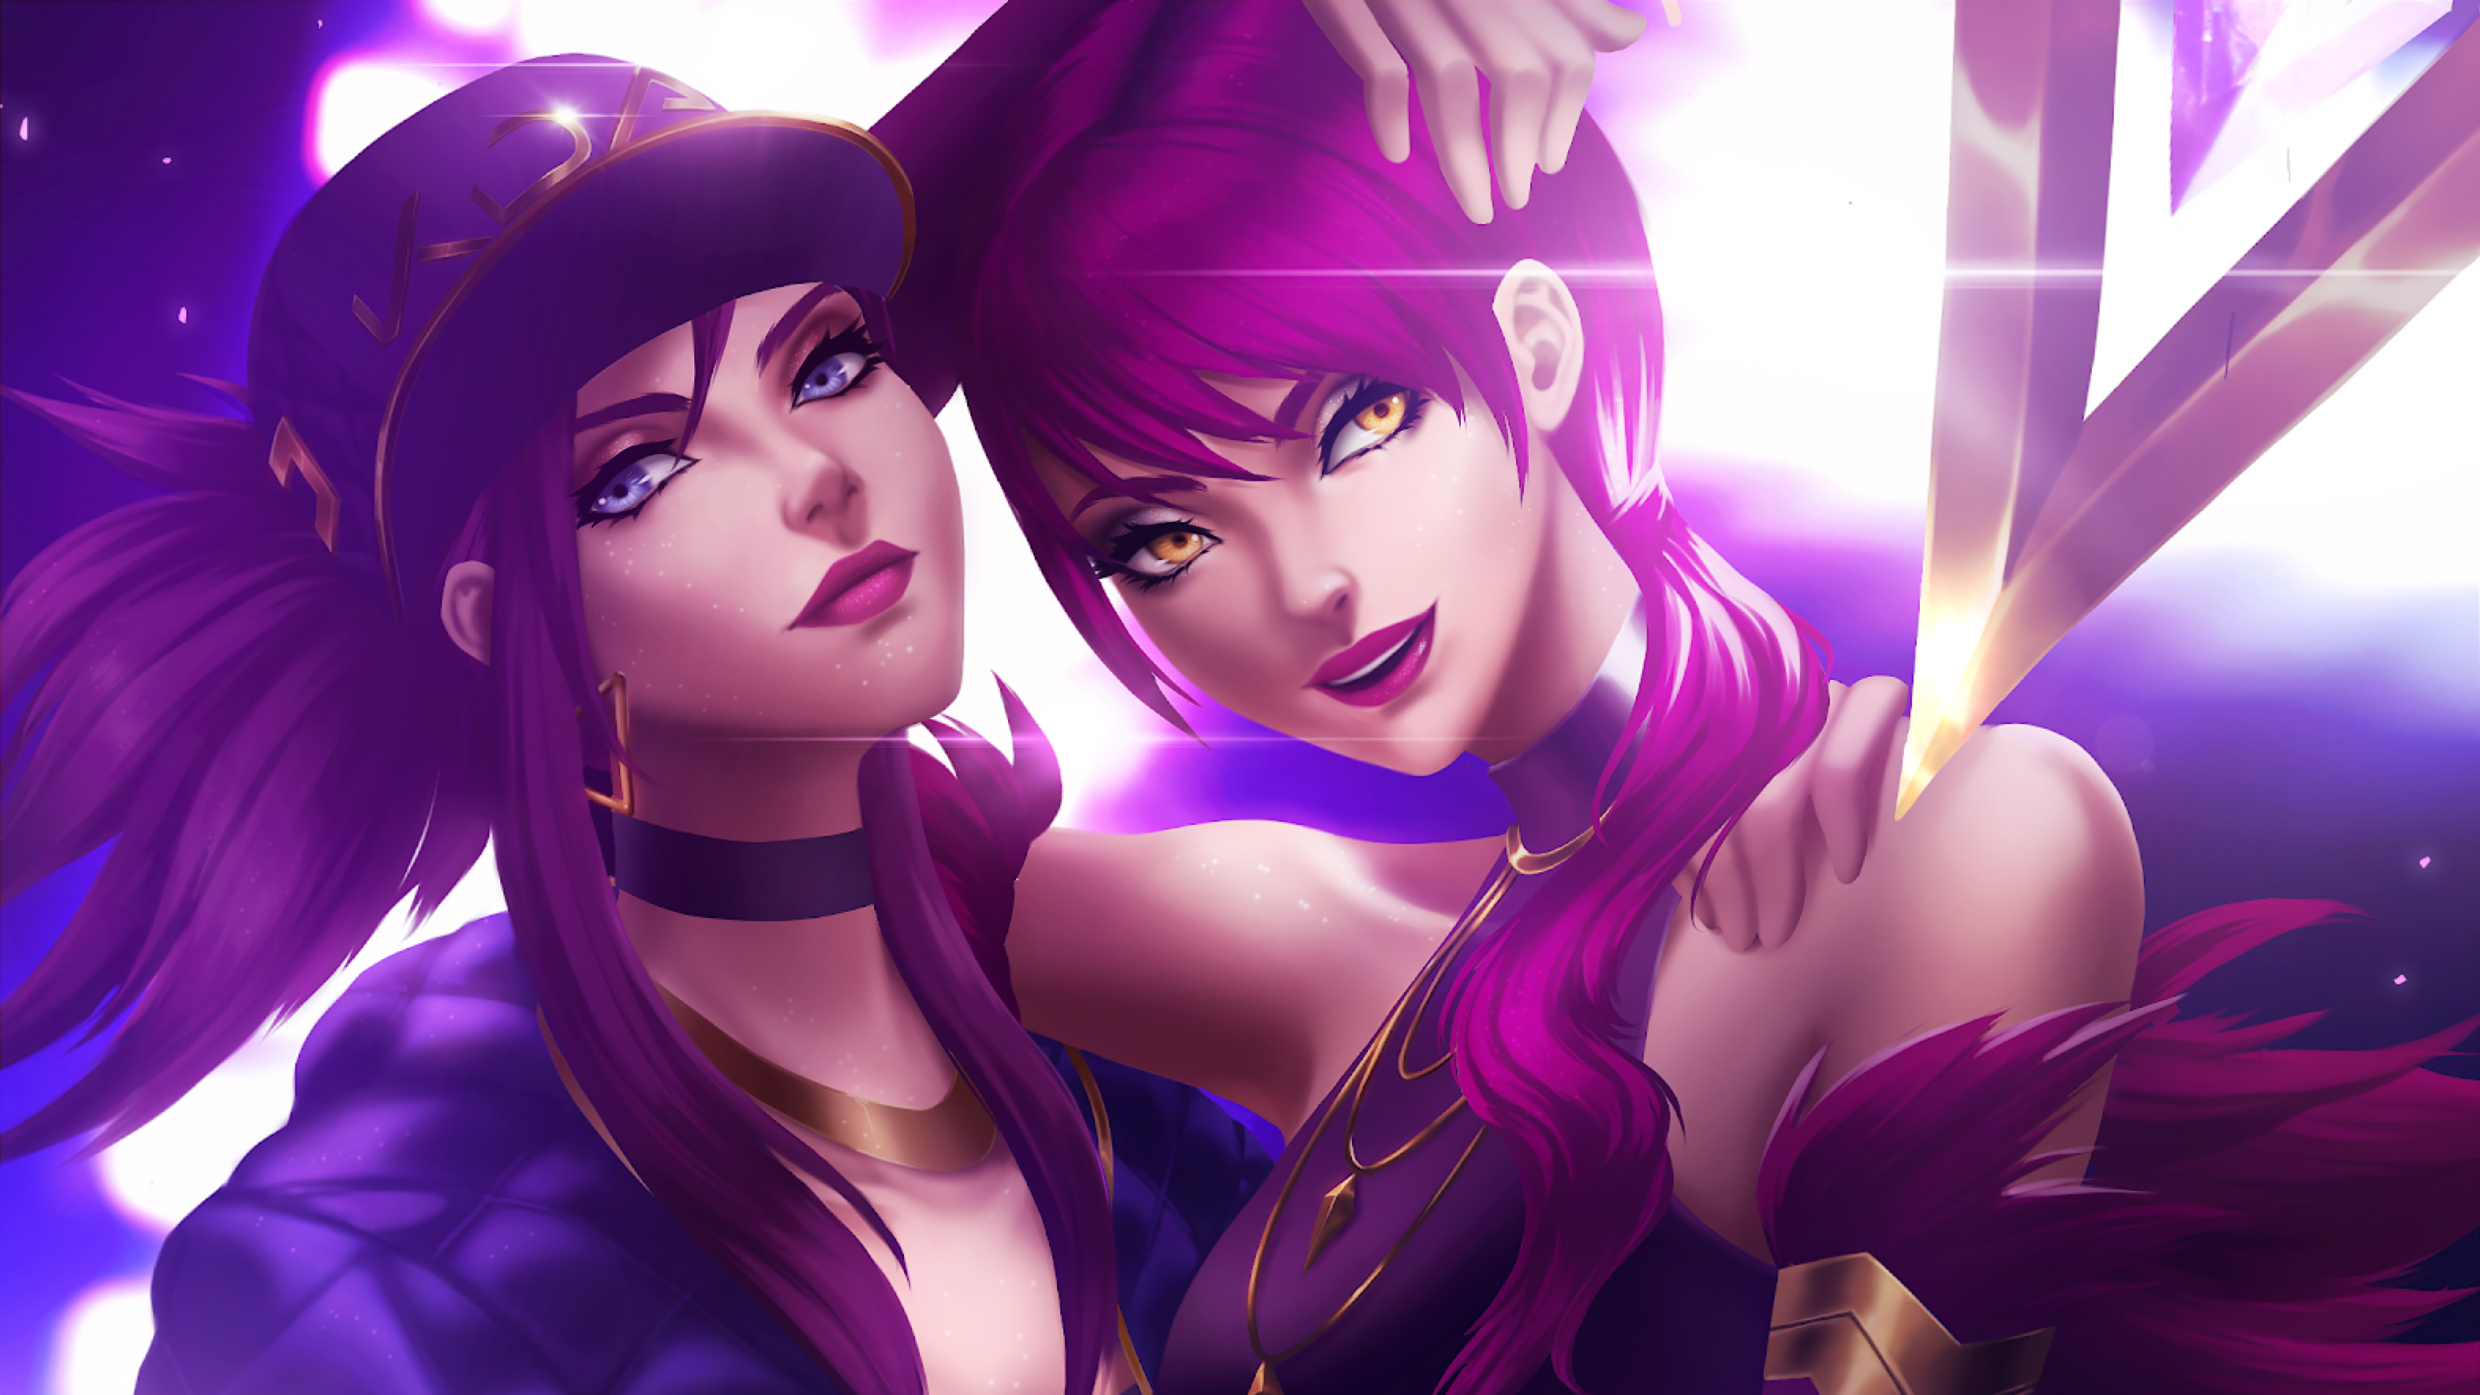 Kda Akali And Evelynn Fan Art Hd Games 4k Wallpapers Images Backgrounds Pho...